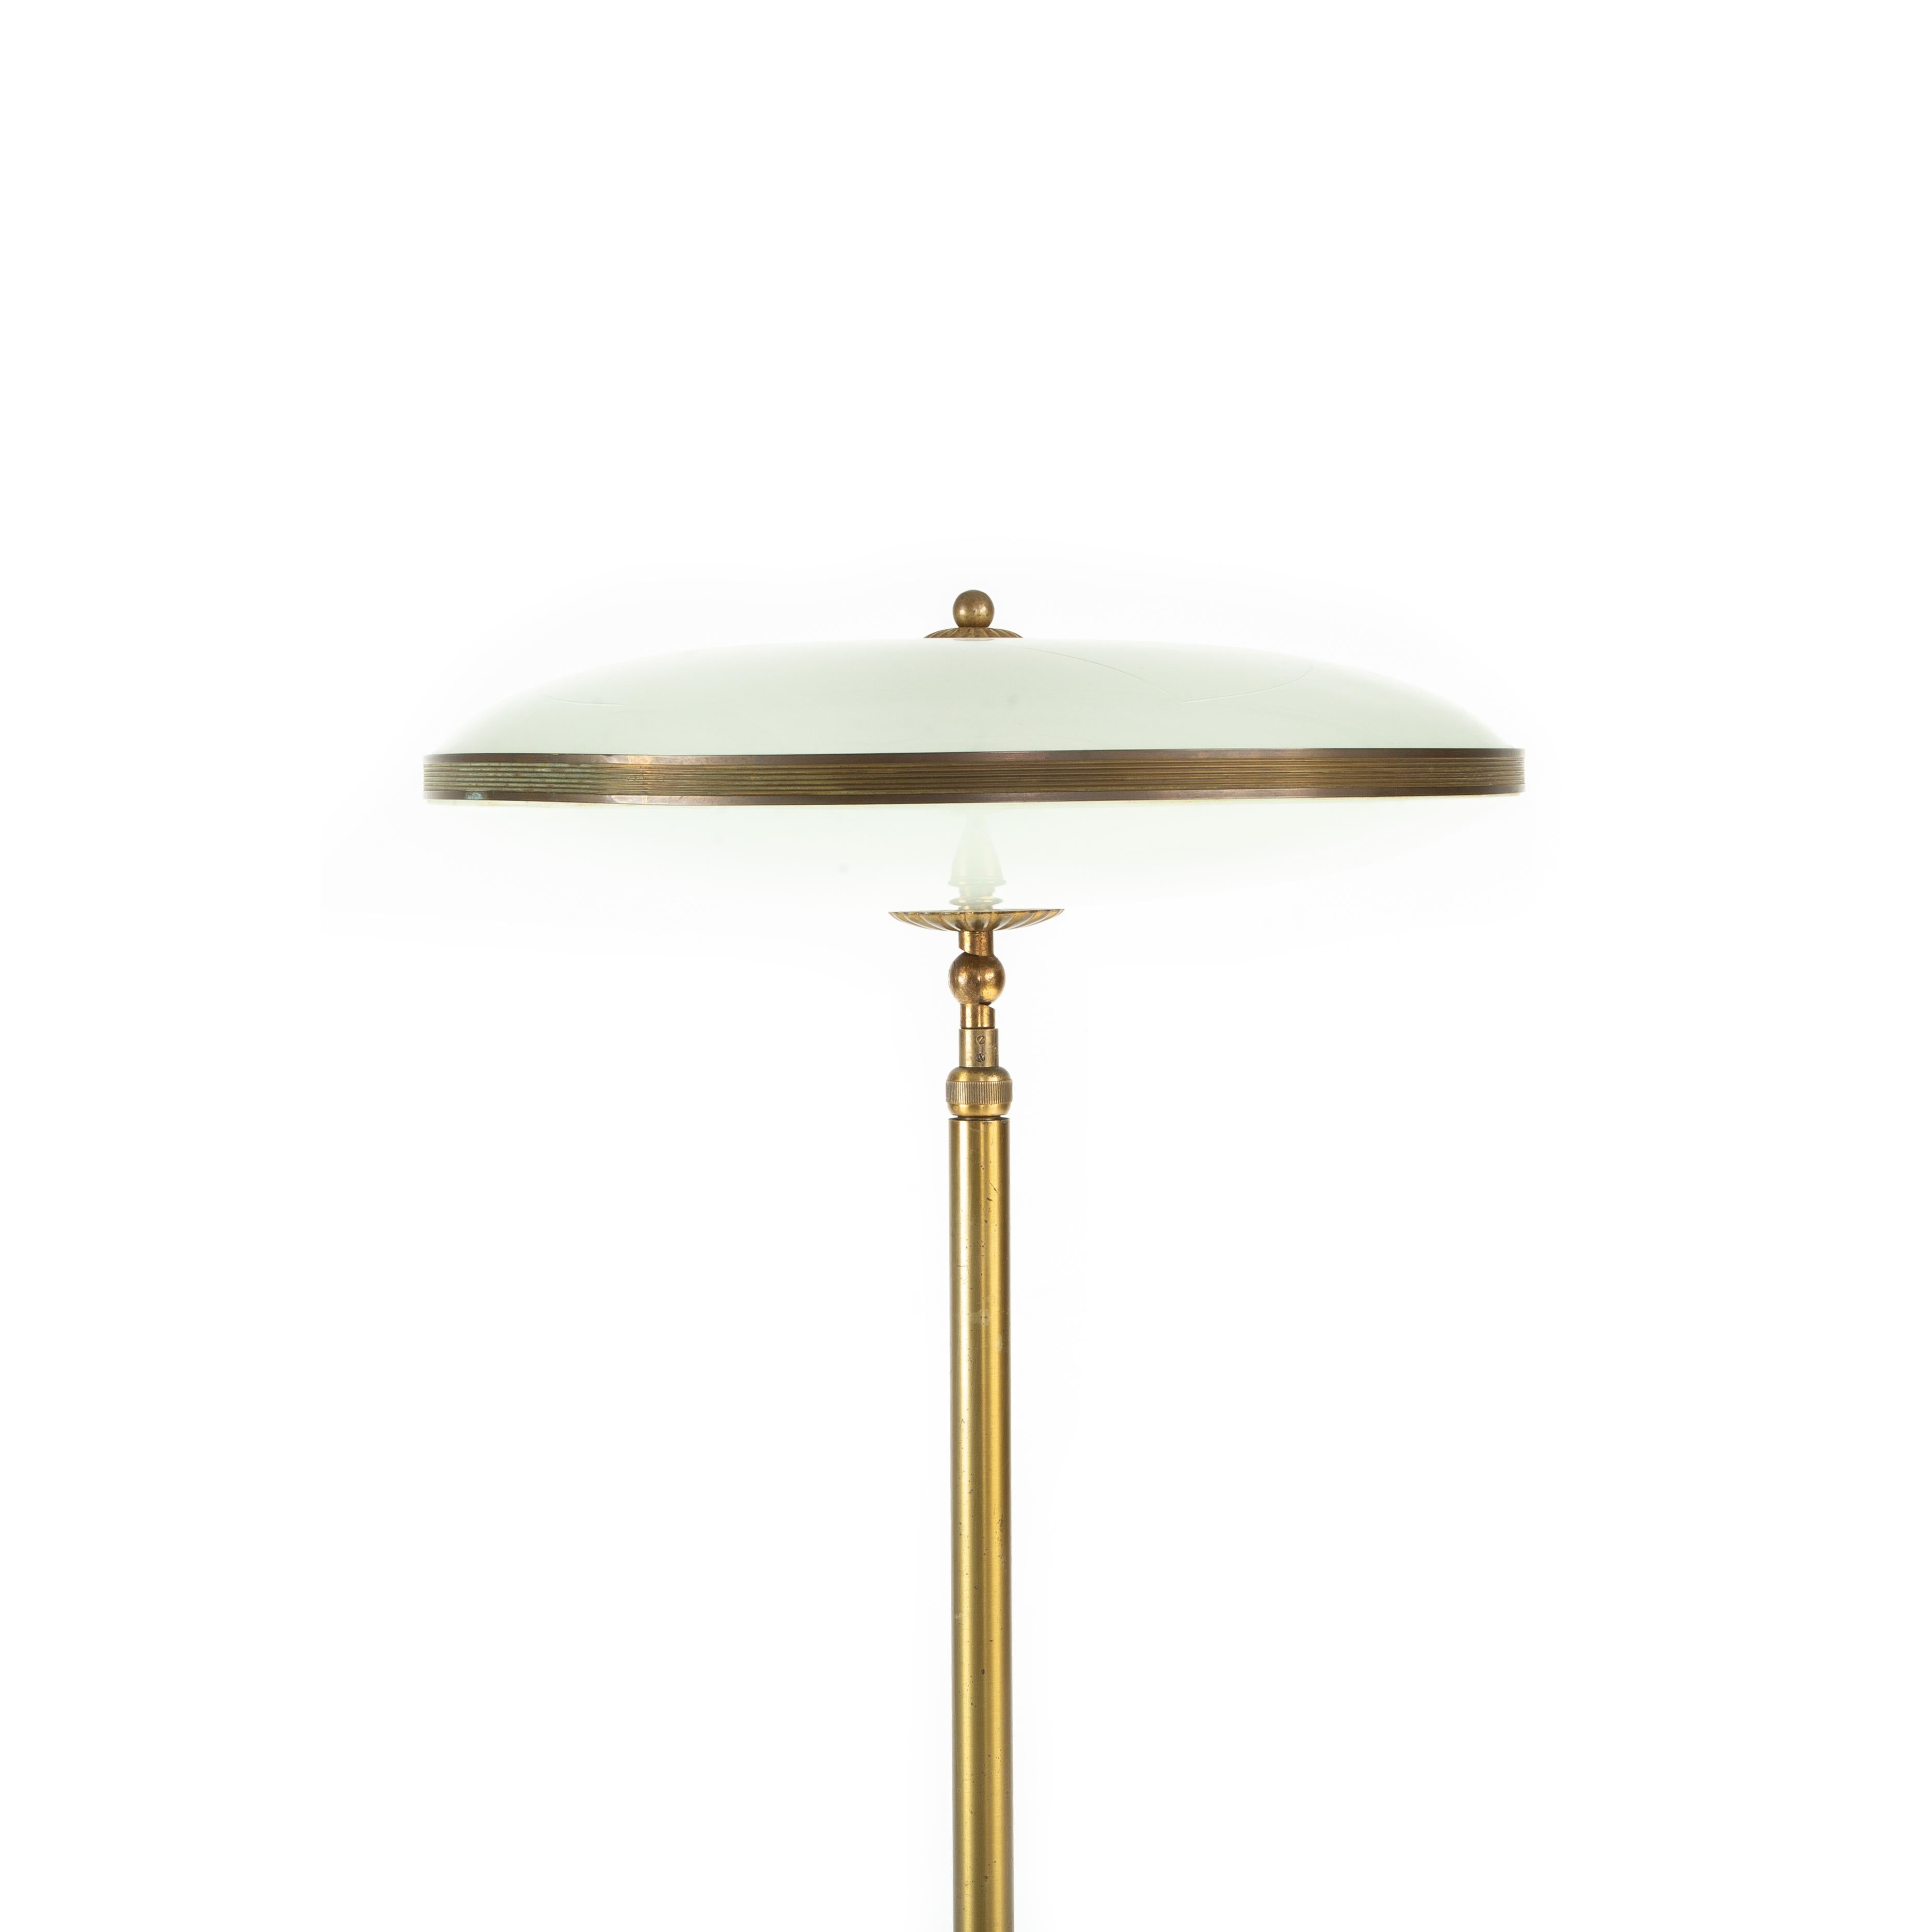 Italian midcentury adjustable floor lamp.
Patinated brass and frosted glass.
Height  also adjusts to 63.5